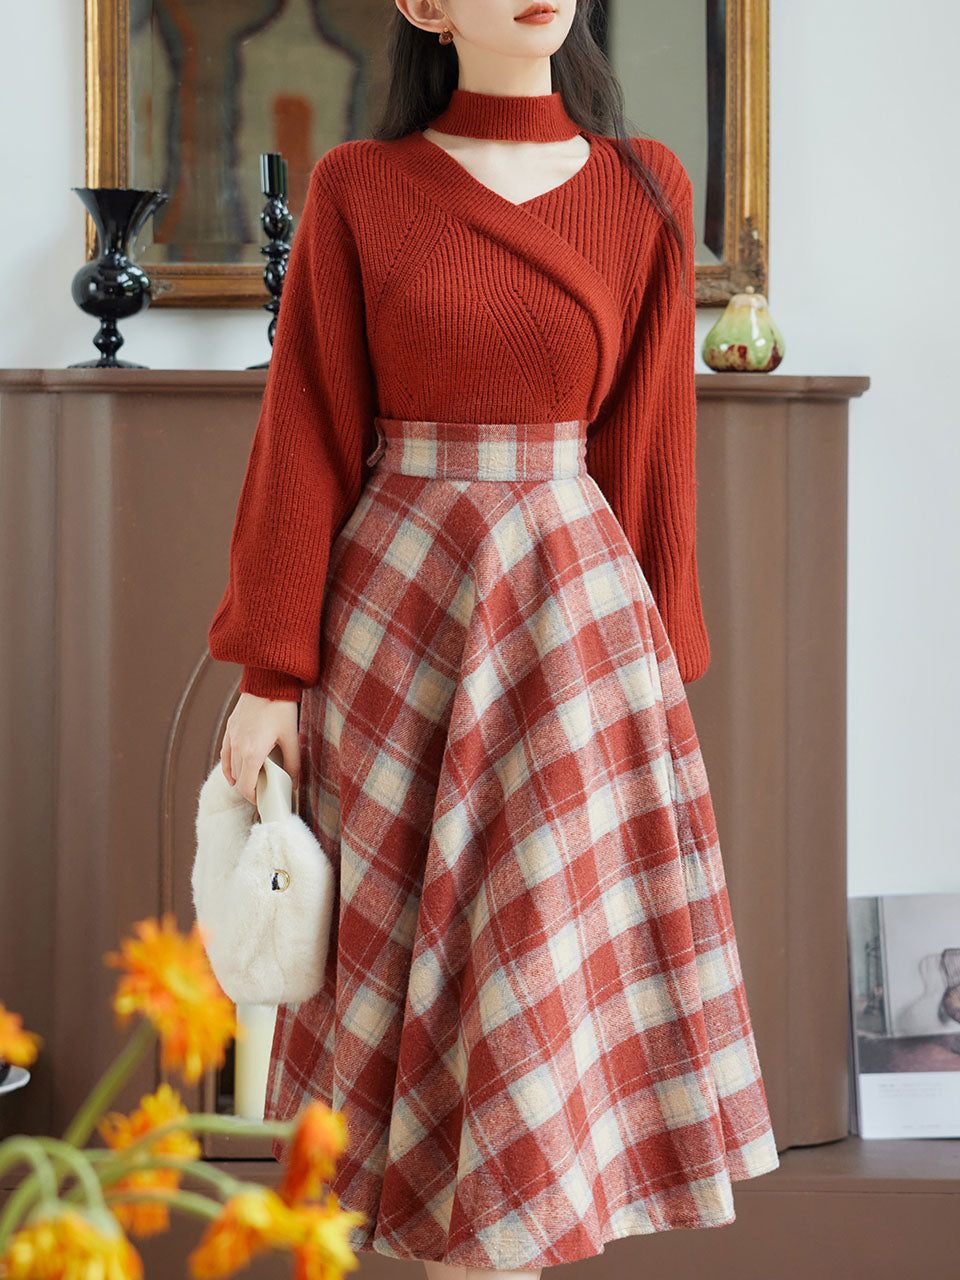 2PS Red Sweater And Scottish Plaid Swing Skirt 1950S Vintage Audrey Hepburn's Style Outfits